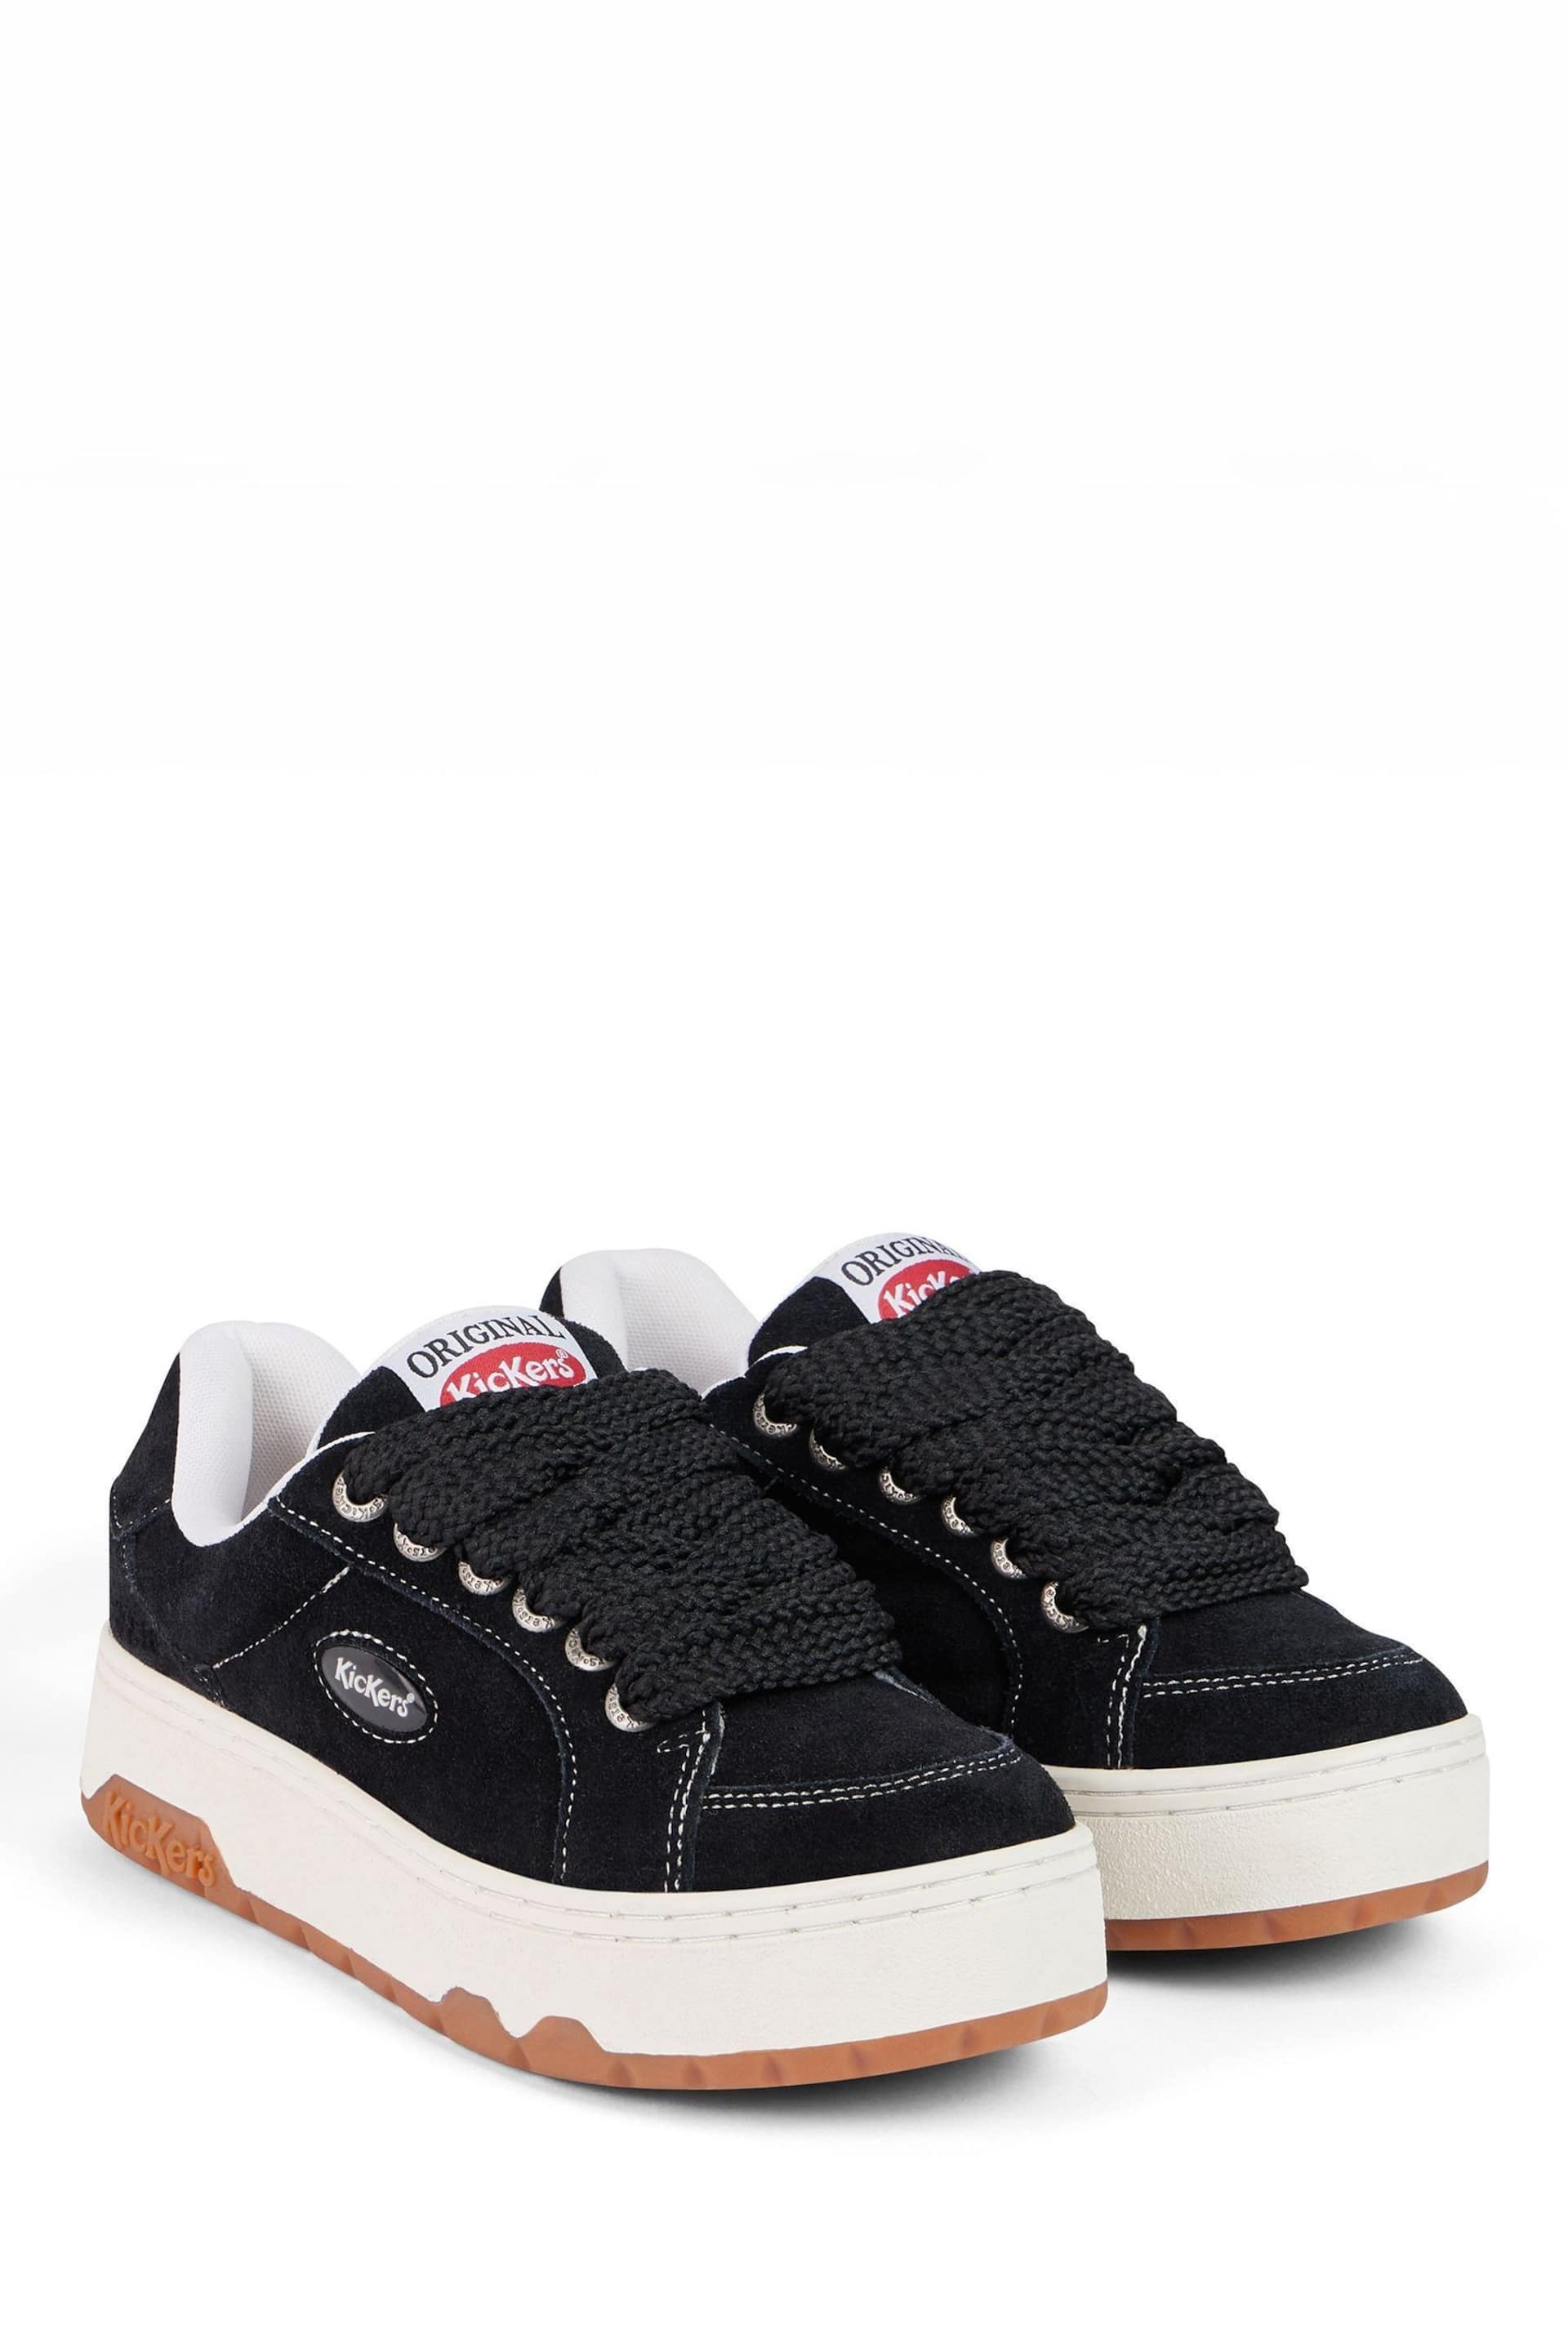 Kickers 70 Lo Suede Black Trainers - Image 2 of 7